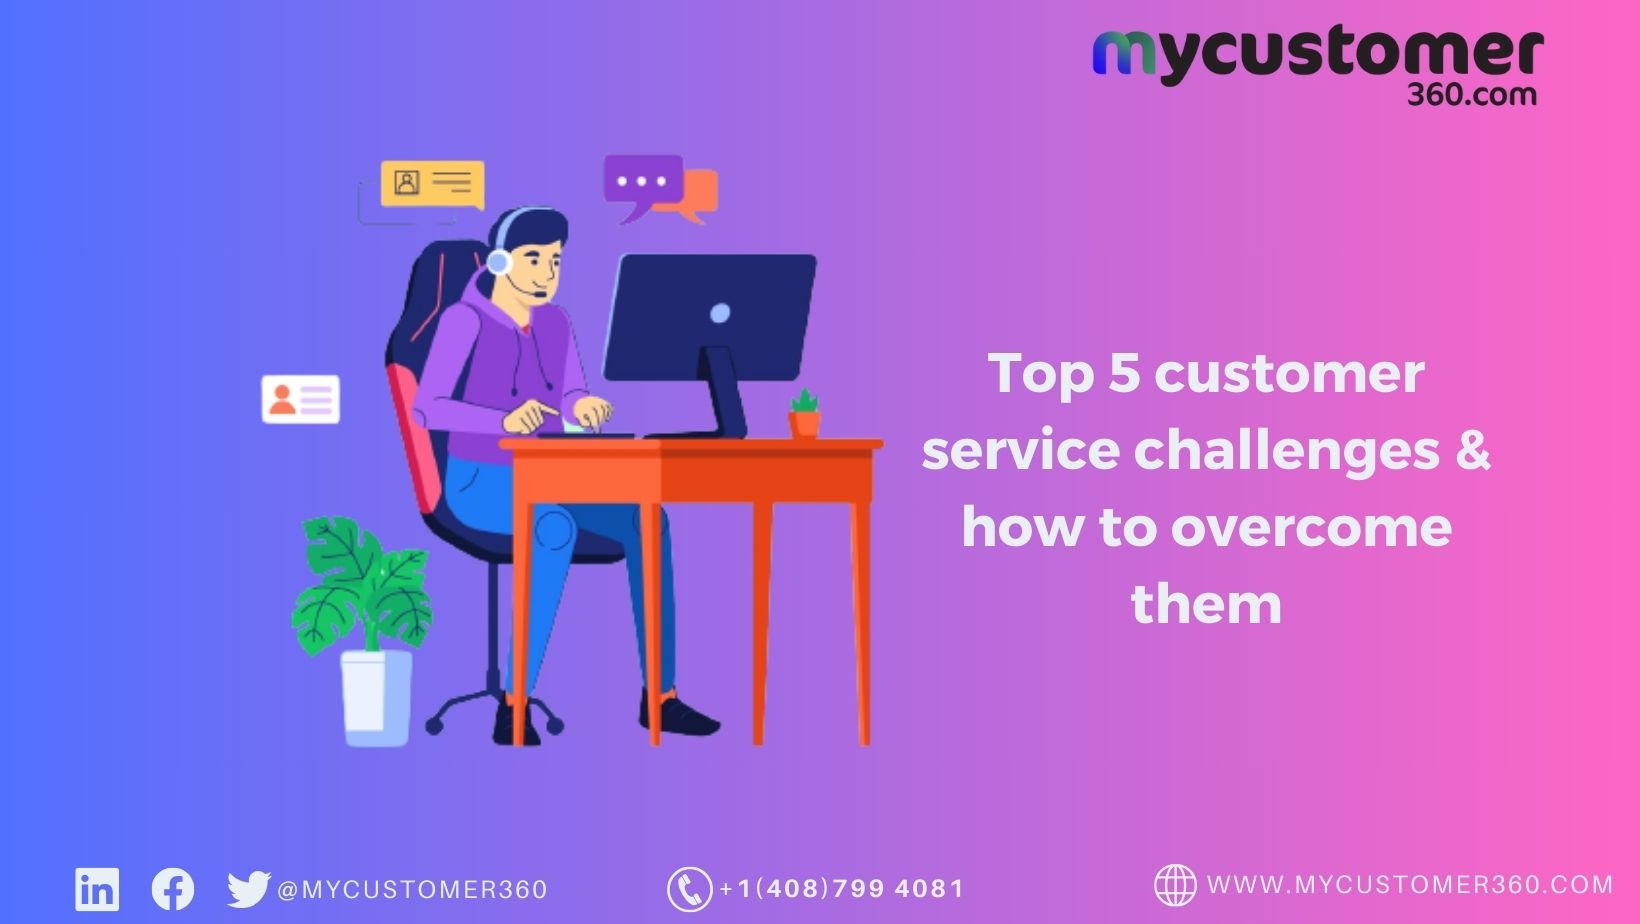 Top 5 customer service challenges & how to overcome them